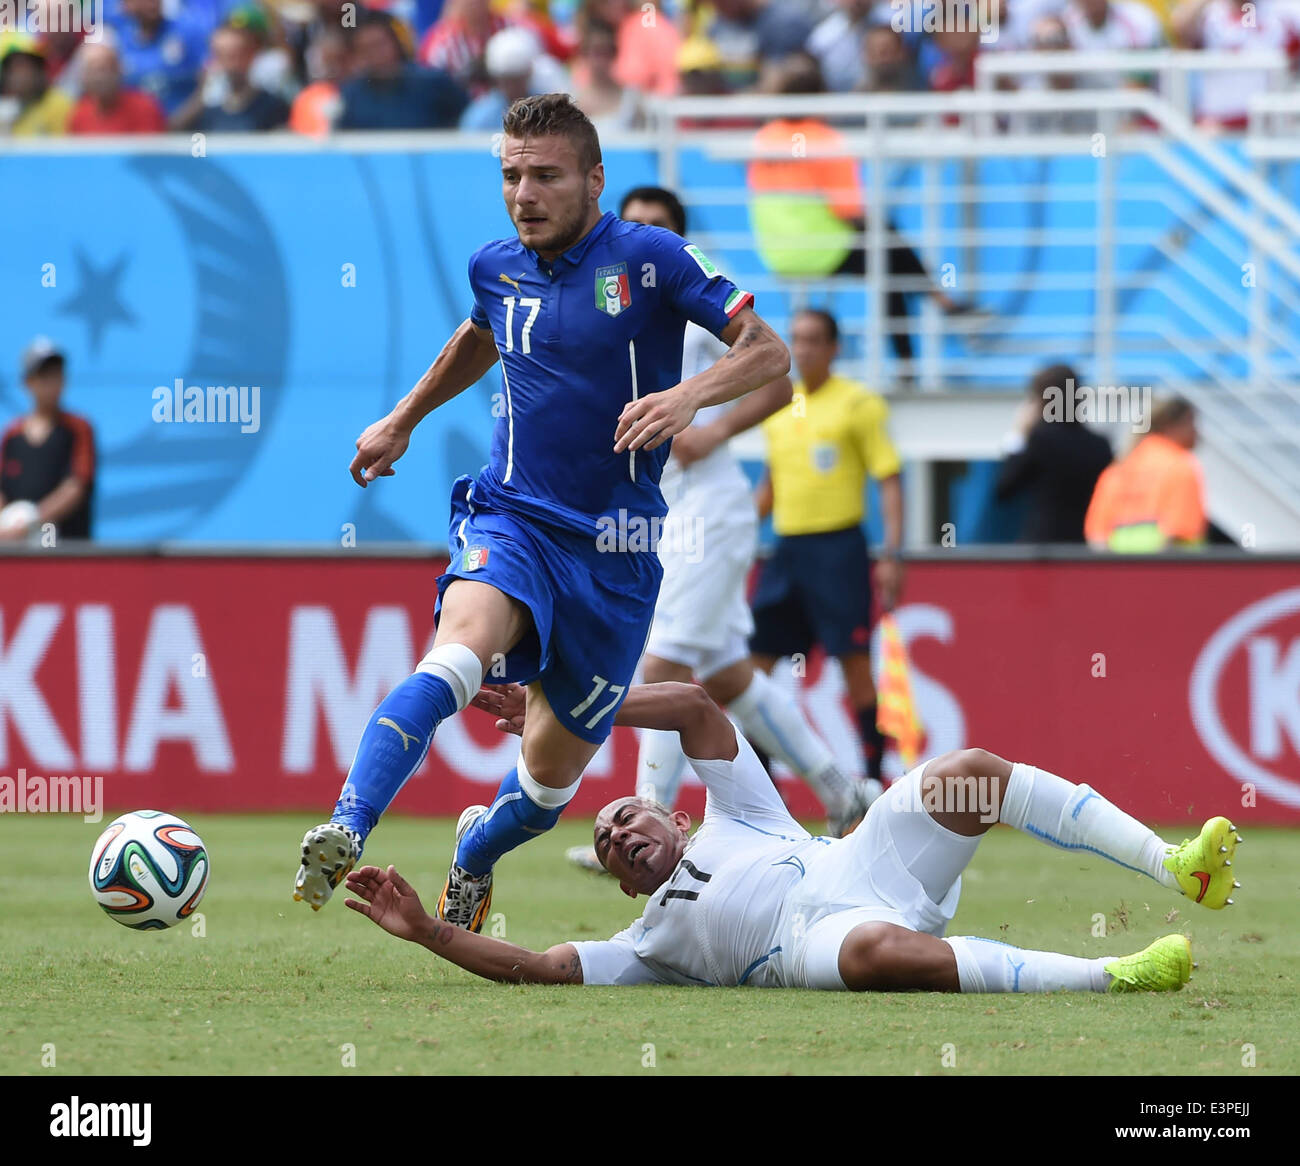 Natal, Brazil. 24th June, 2014. Italy's Ciro Immobile vies for the ball with Uruguay's Egidio Arevalo Rios during a Group D match between Italy and Uruguay of 2014 FIFA World Cup at the Estadio das Dunas Stadium in Natal, Brazil, June 24, 2014. © Guo Yong/Xinhua/Alamy Live News Stock Photo